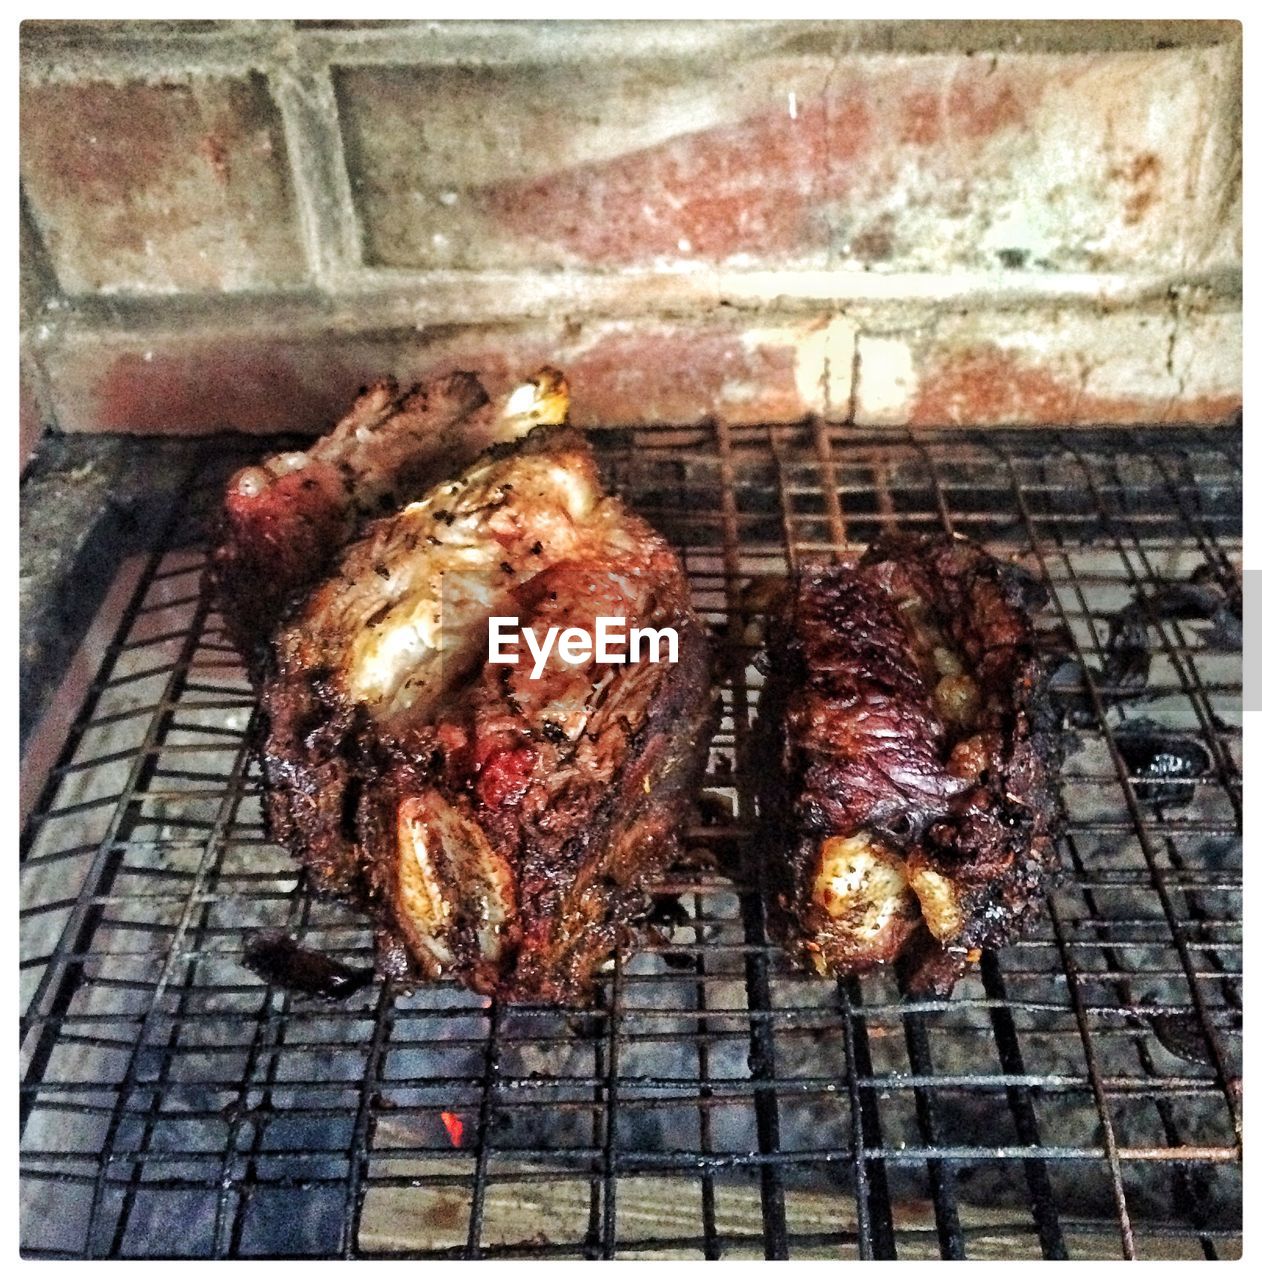 BARBECUE MEAT ON BARBECUE GRILL